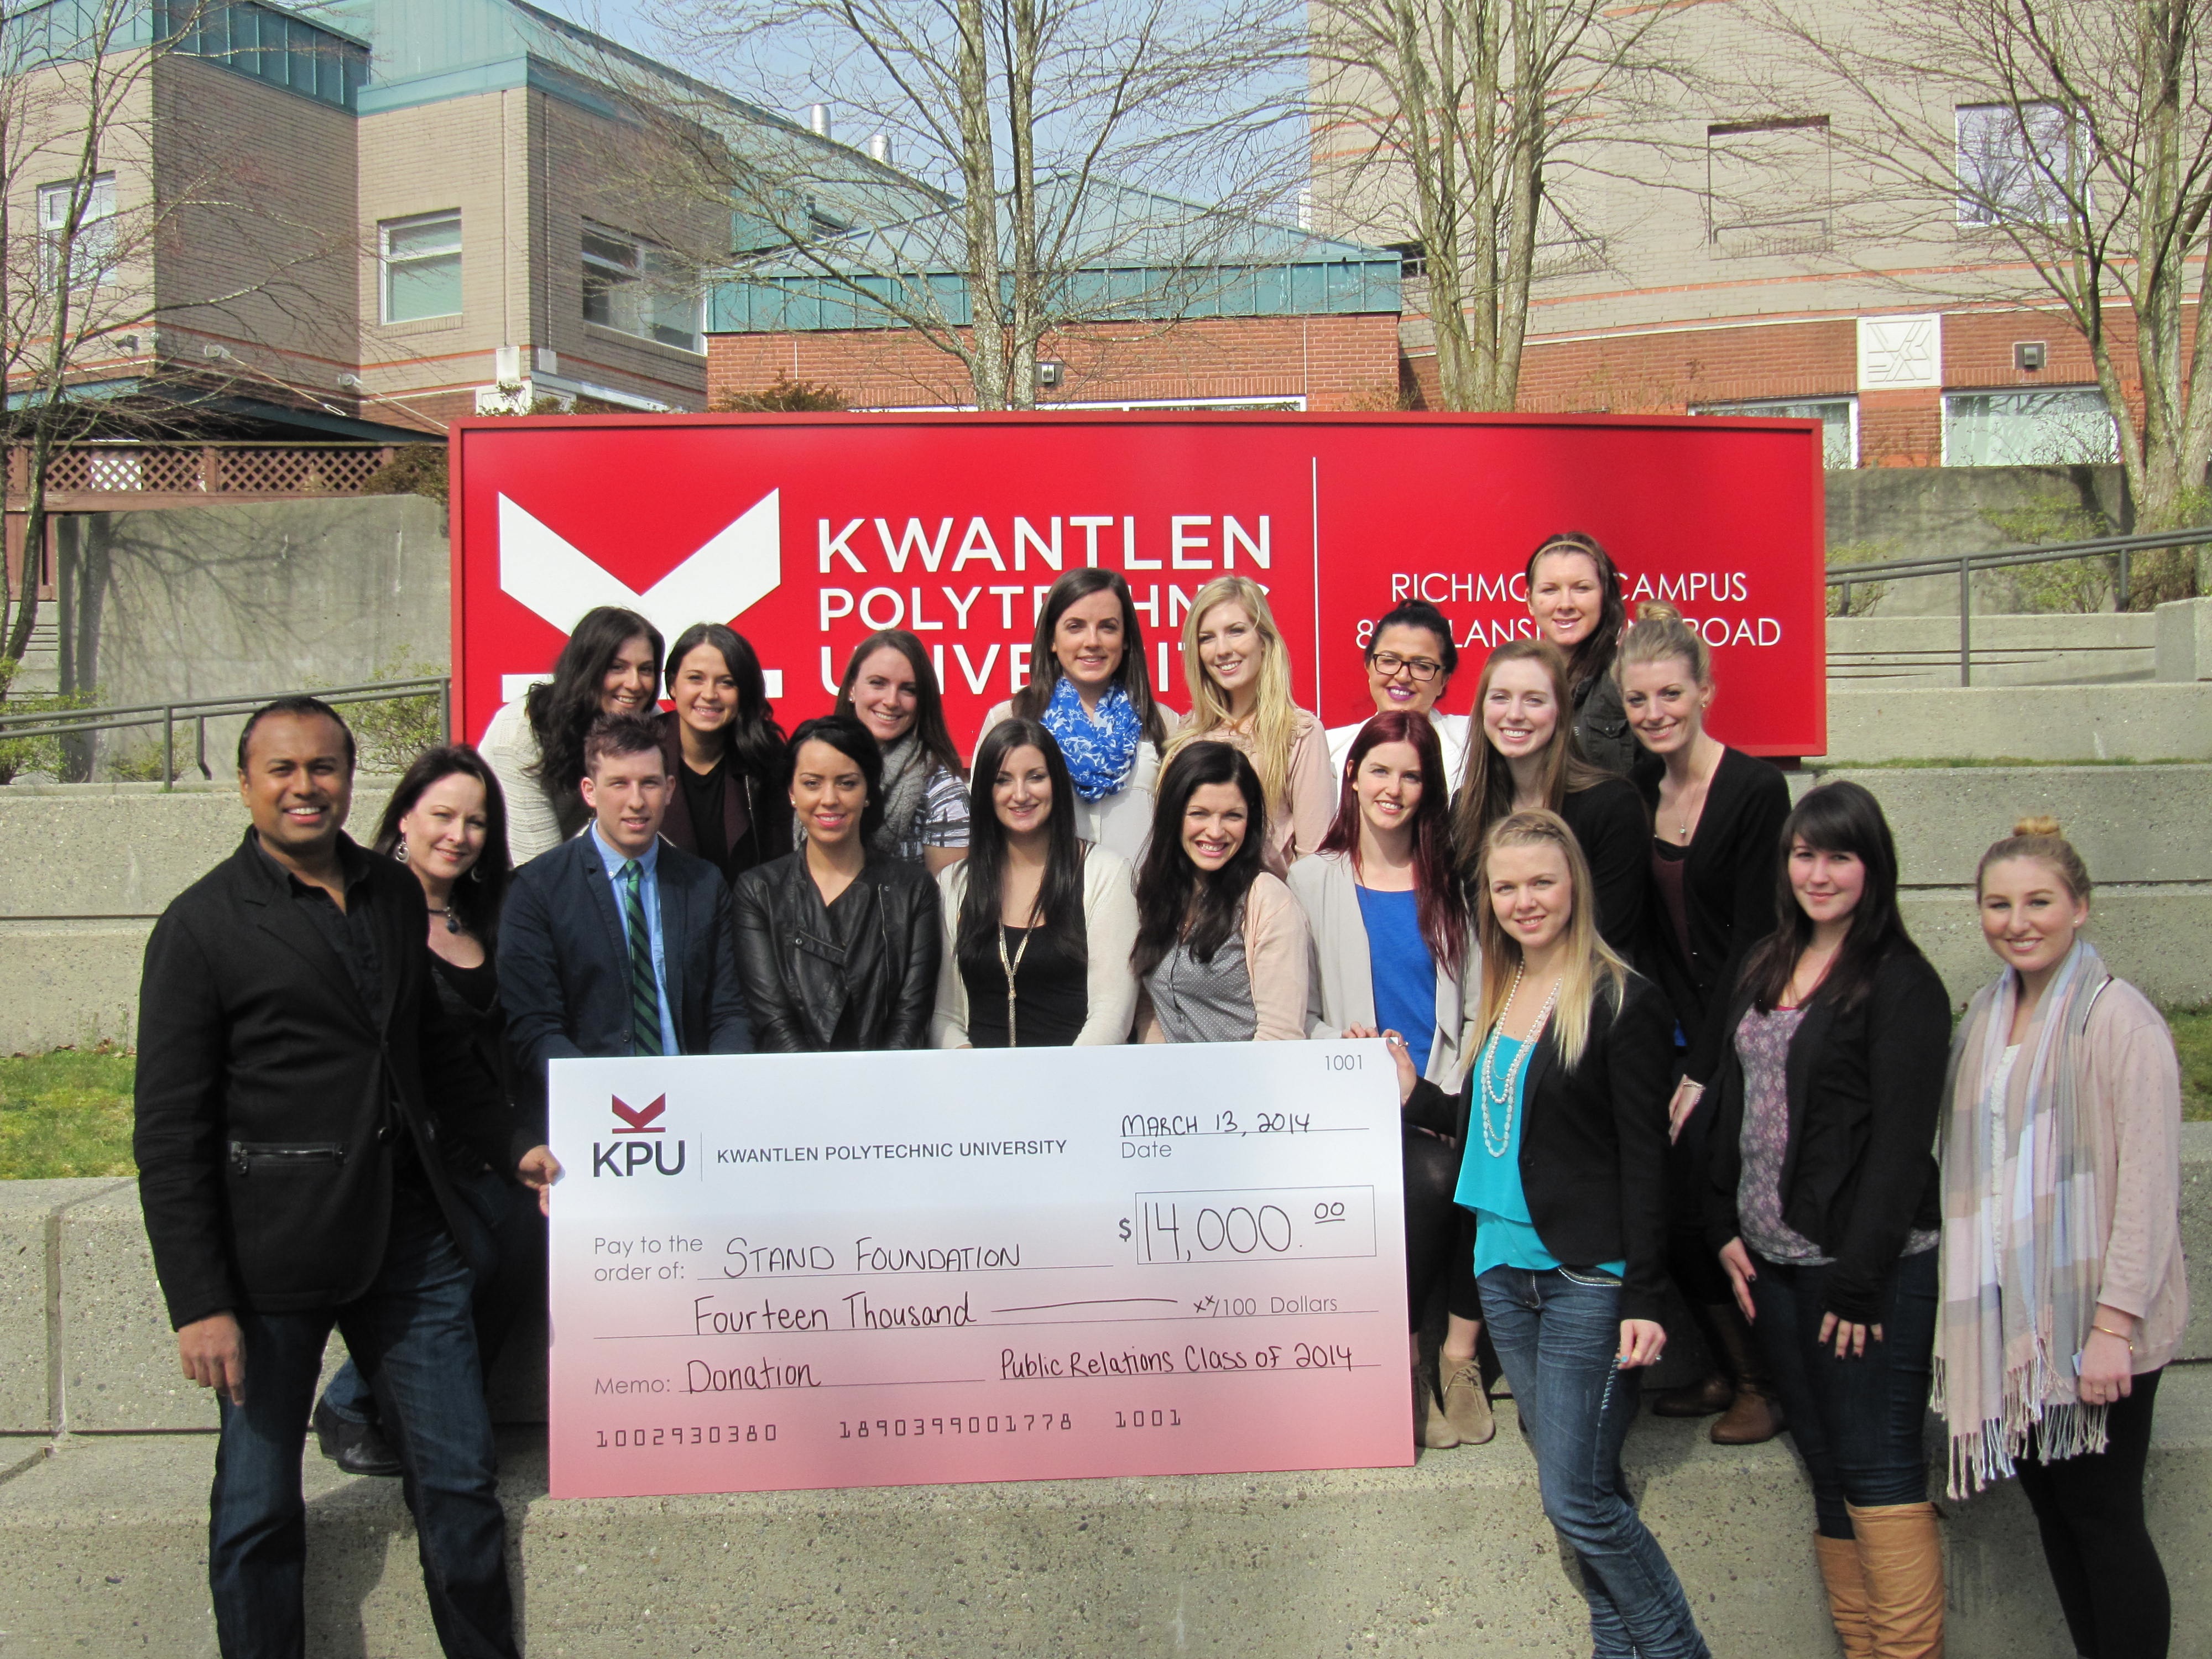 Public Relations Class from Kwantlen Polytechnic University raises $14,000 for STAND at Growth Gala